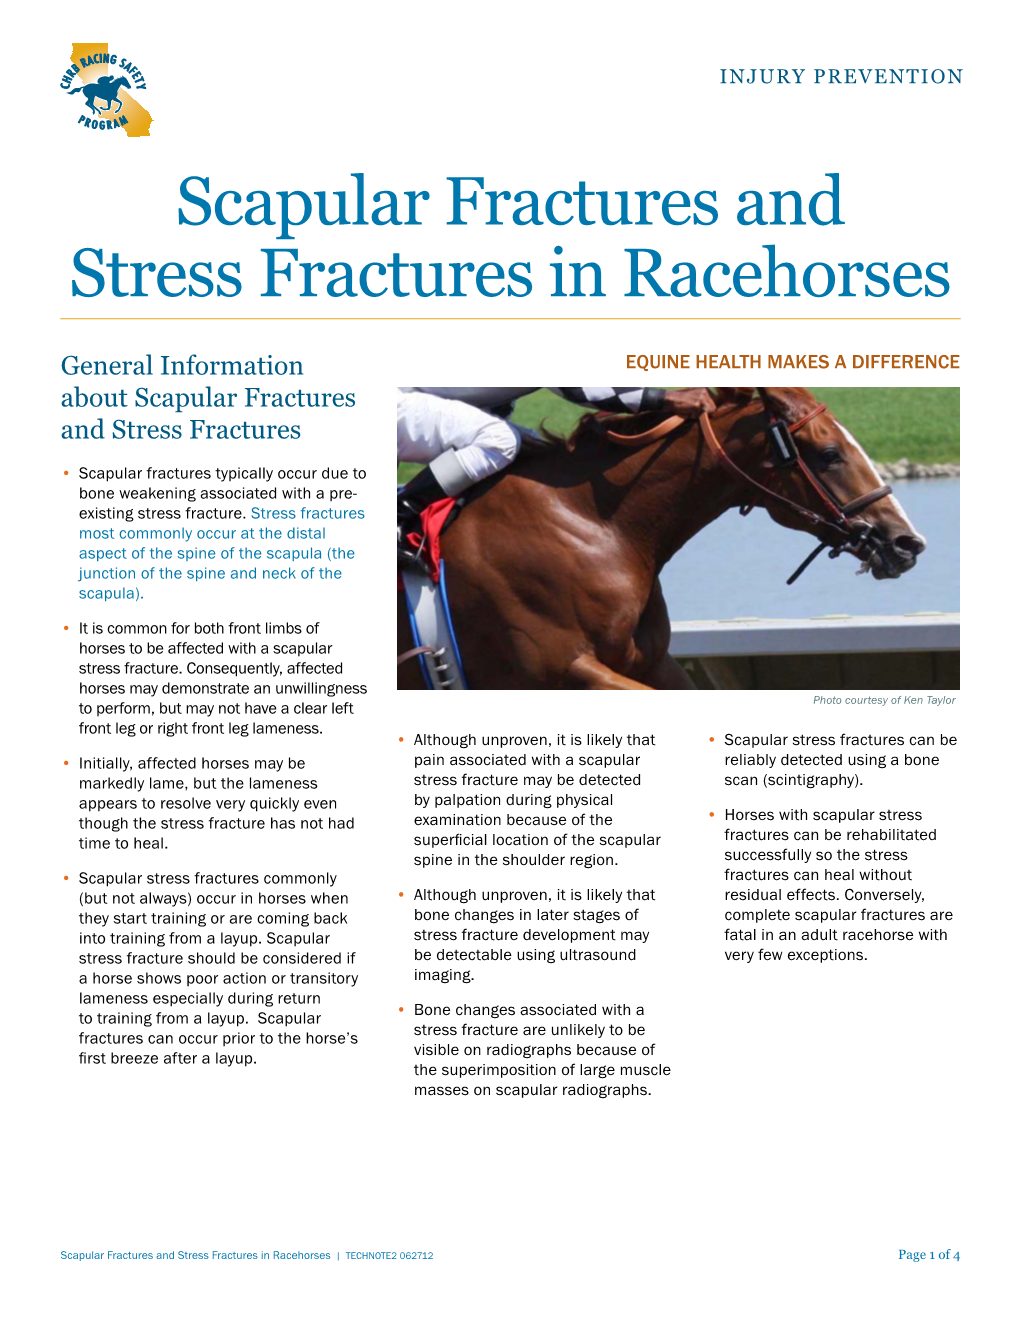 Scapular Fractures Technical Notes (Pdf)